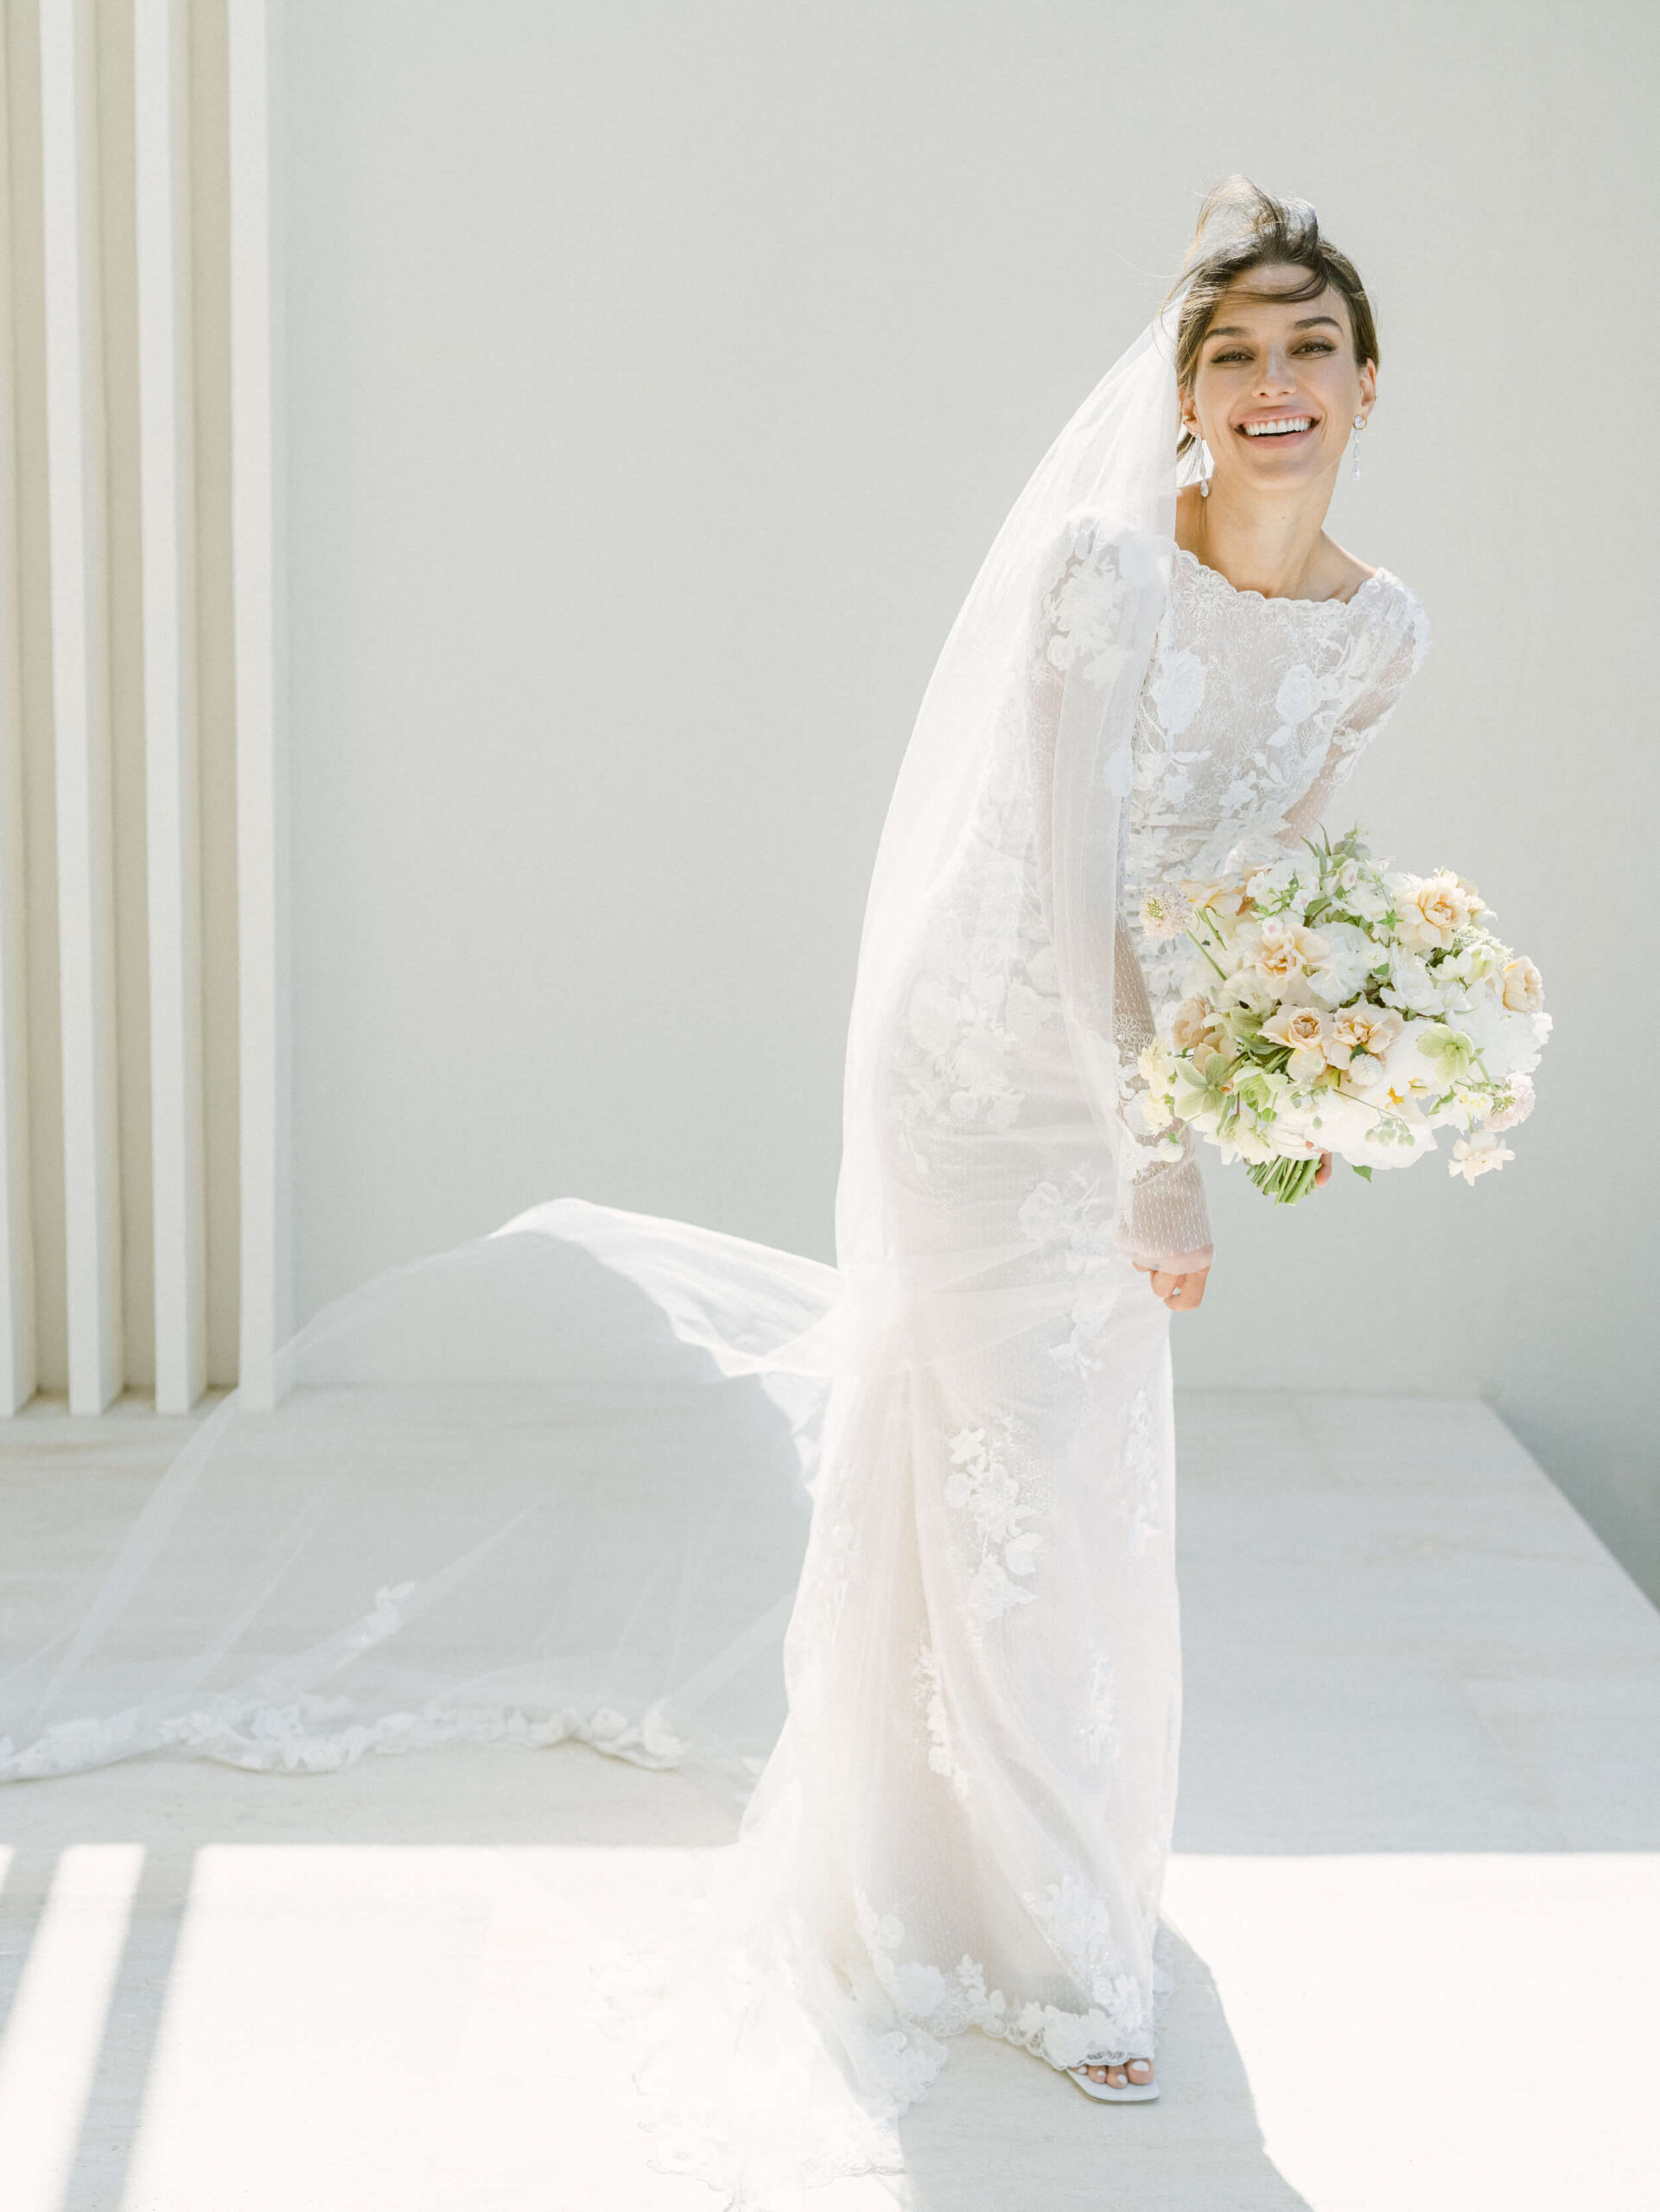 Olga laughing in her wedding gown, veil, holding her bouquet, wind blowing